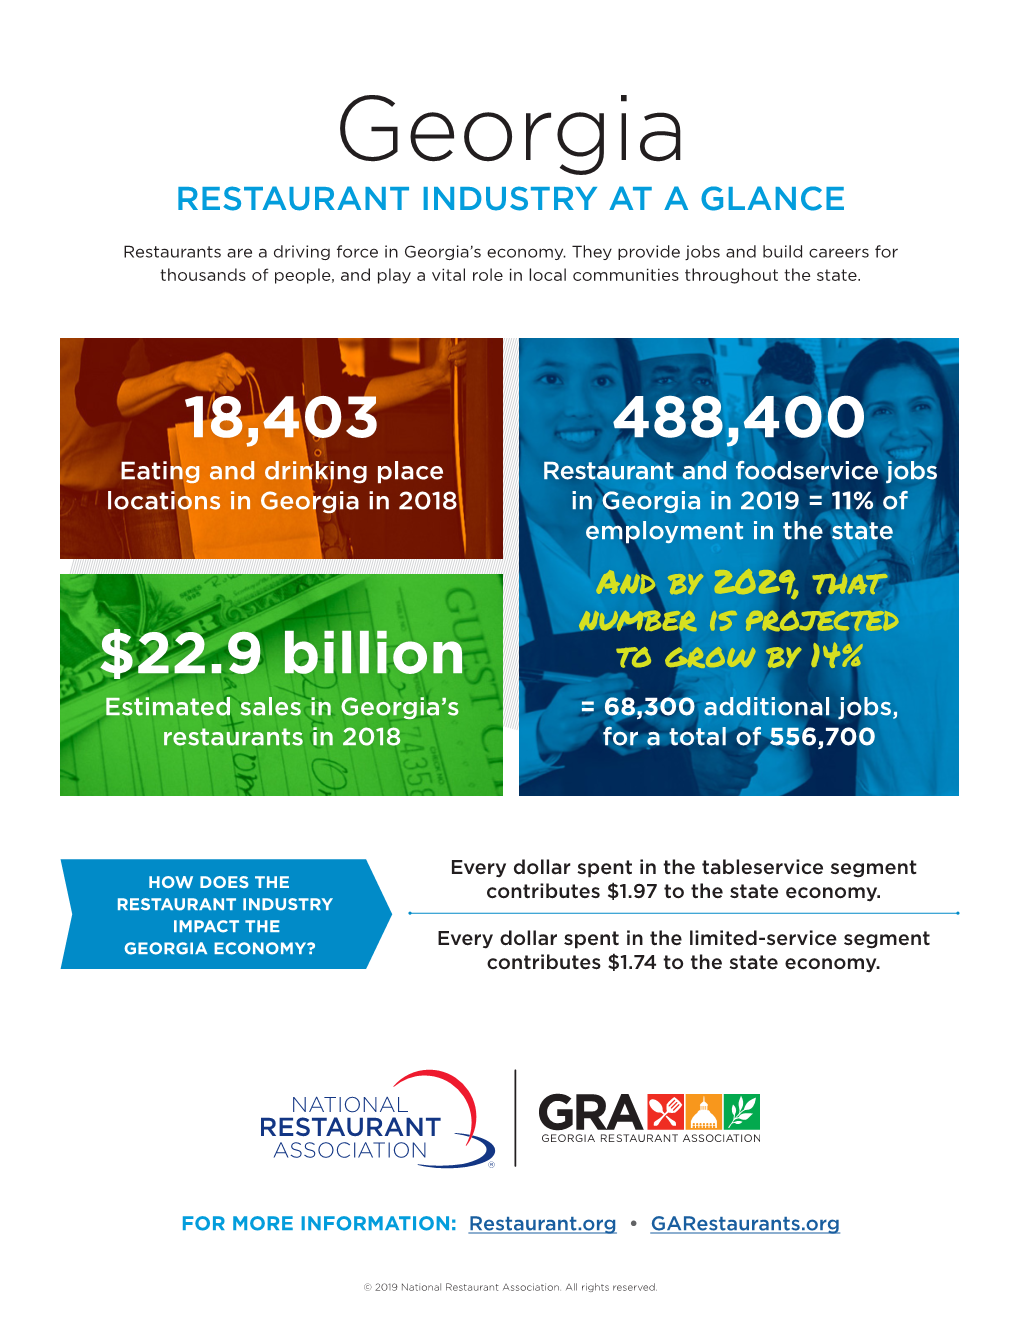 Georgia RESTAURANT INDUSTRY at a GLANCE